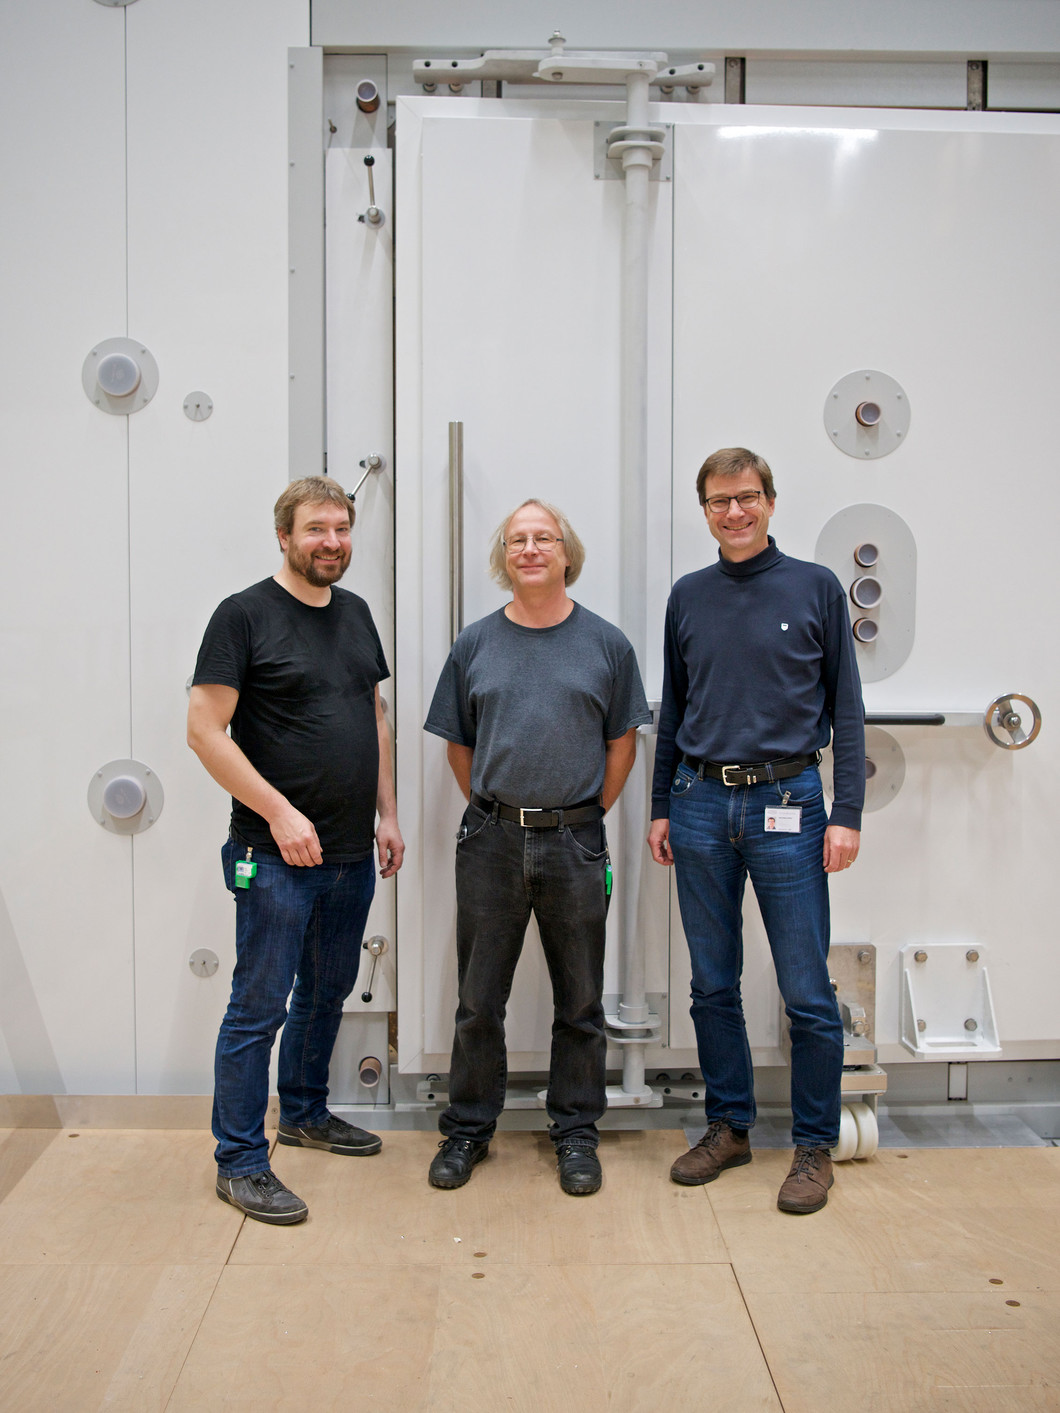 Georg Bison (left), Bernhard Lauss (center), and Klaus Kirch in front of the door to the shielding room.